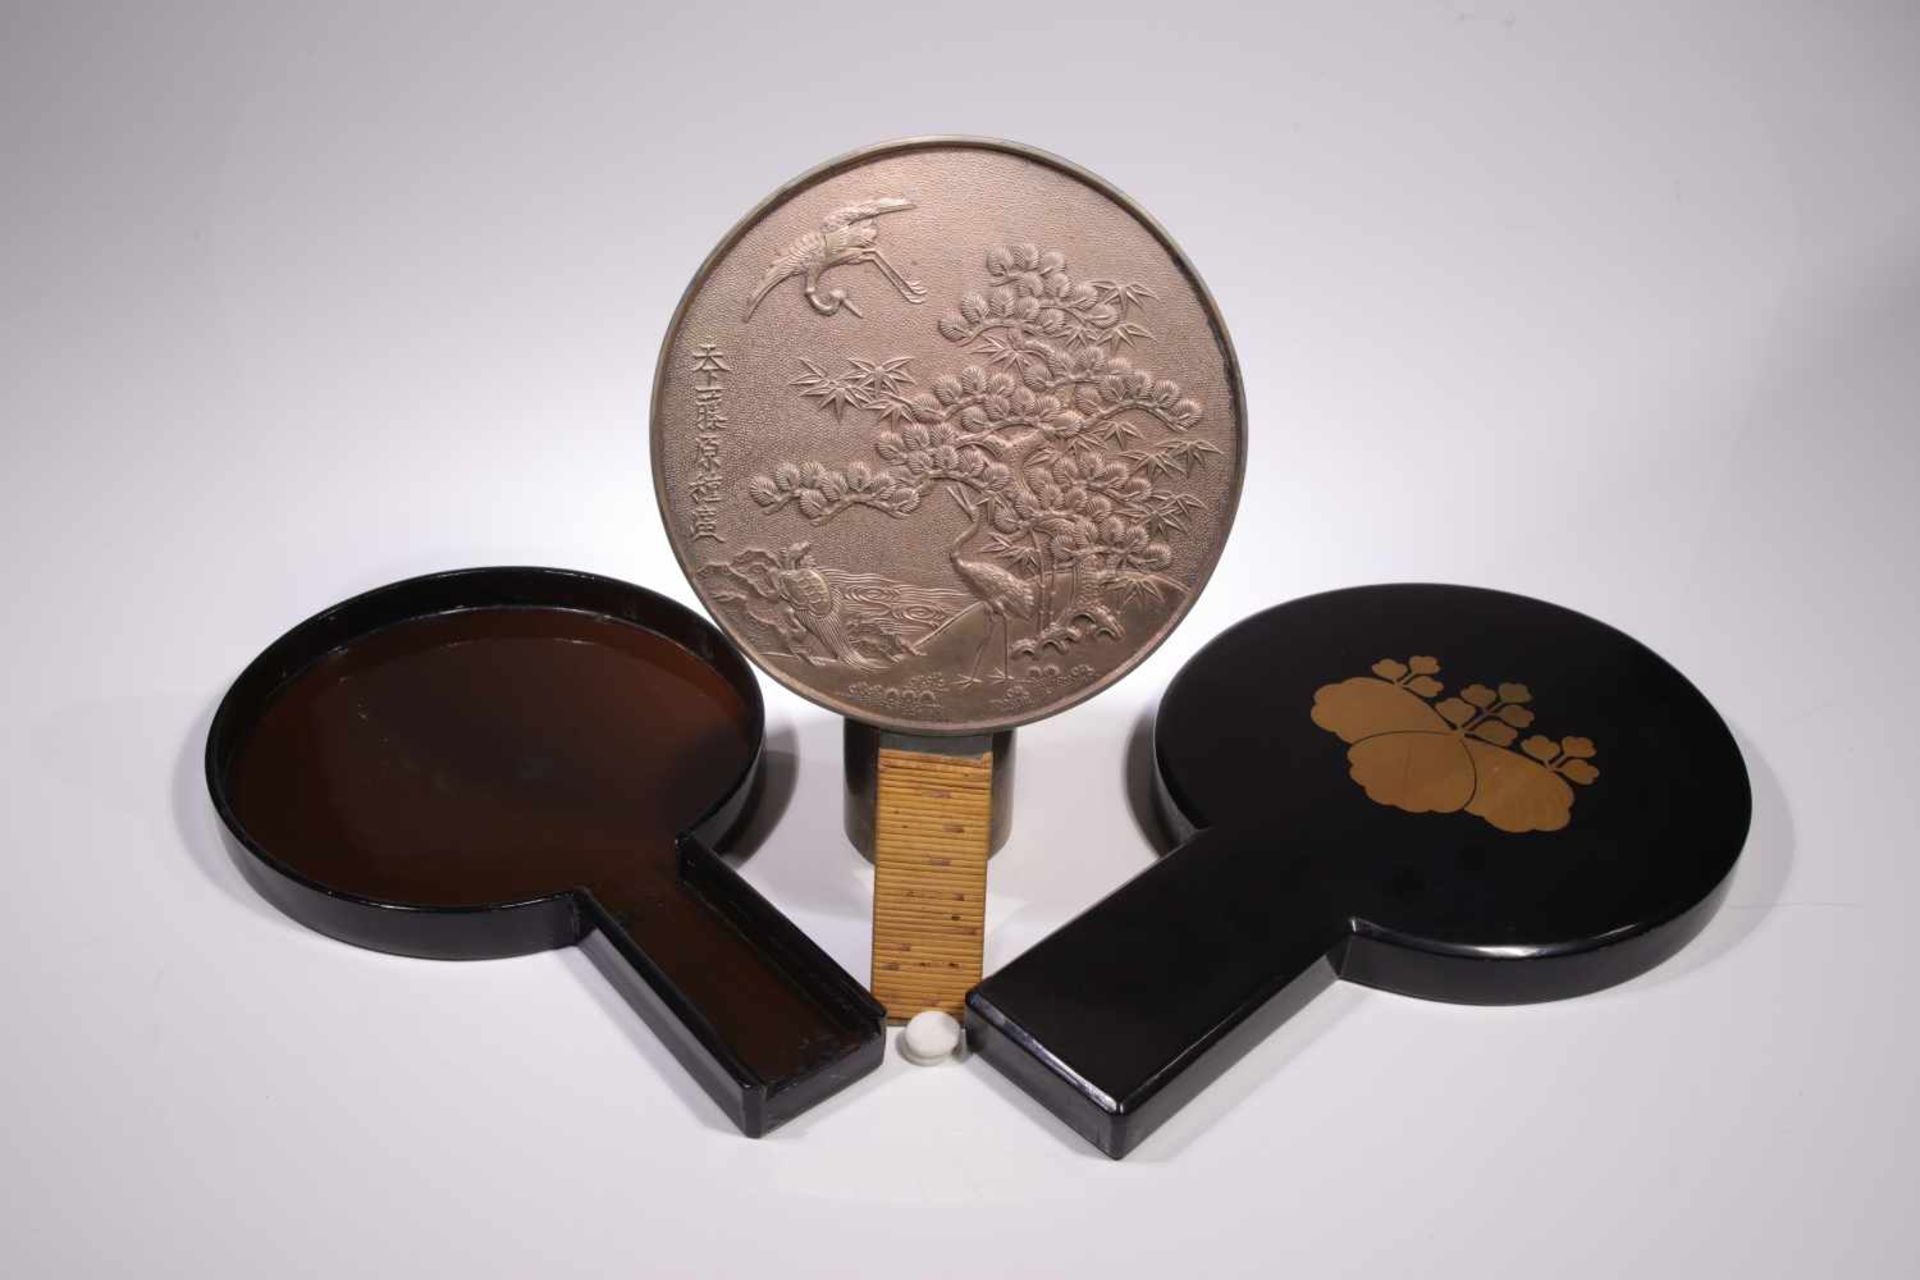 JAPANESE MIRROR IN ORIGINAL CASESilver and bamboo, case black lacquer with gold,Japan, 19th